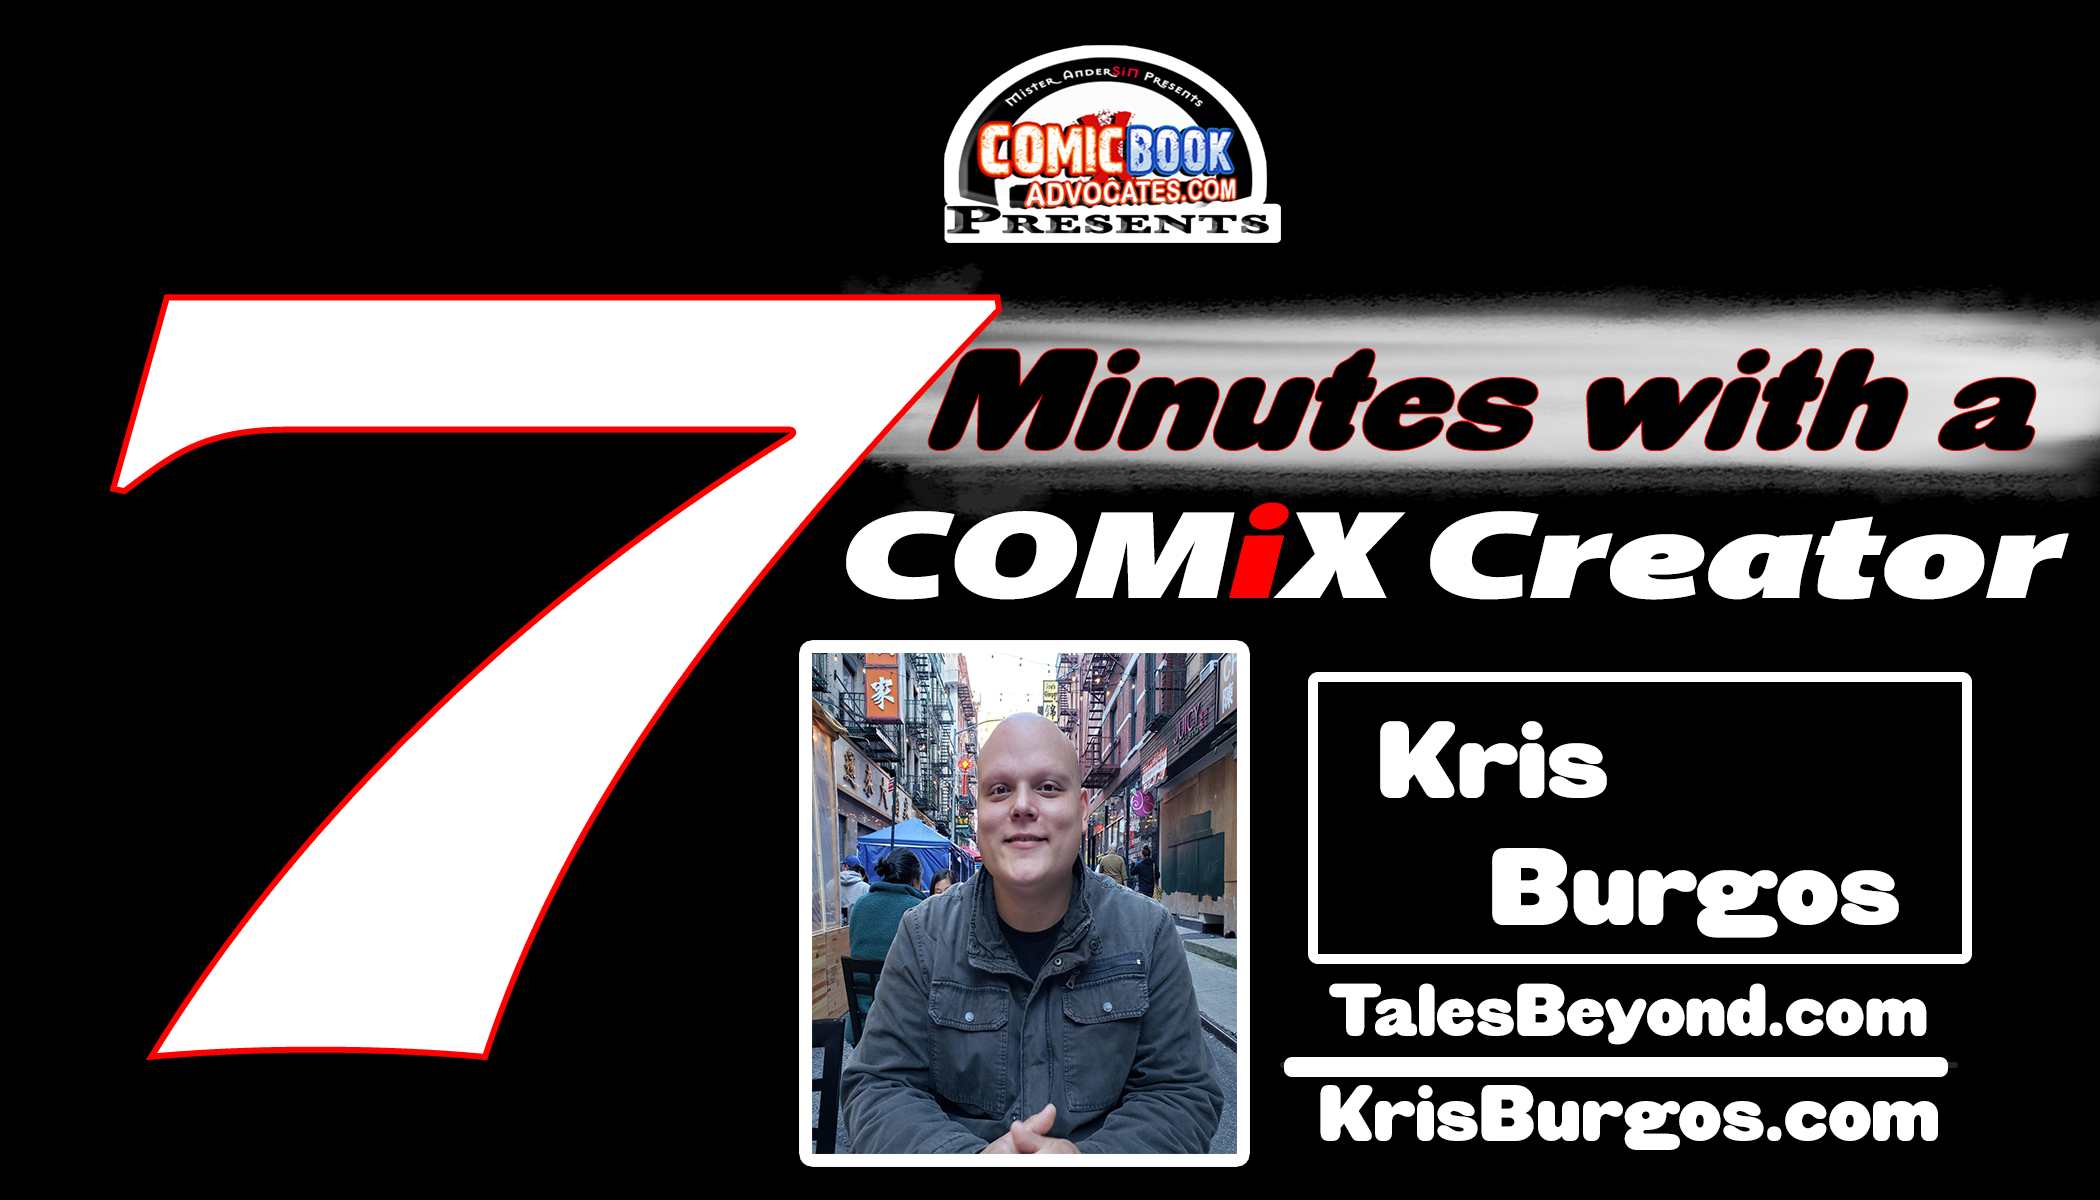 7 Minutes with CoMiX Creator Kris Burgos-off the COMiXNEWSWiRE.com